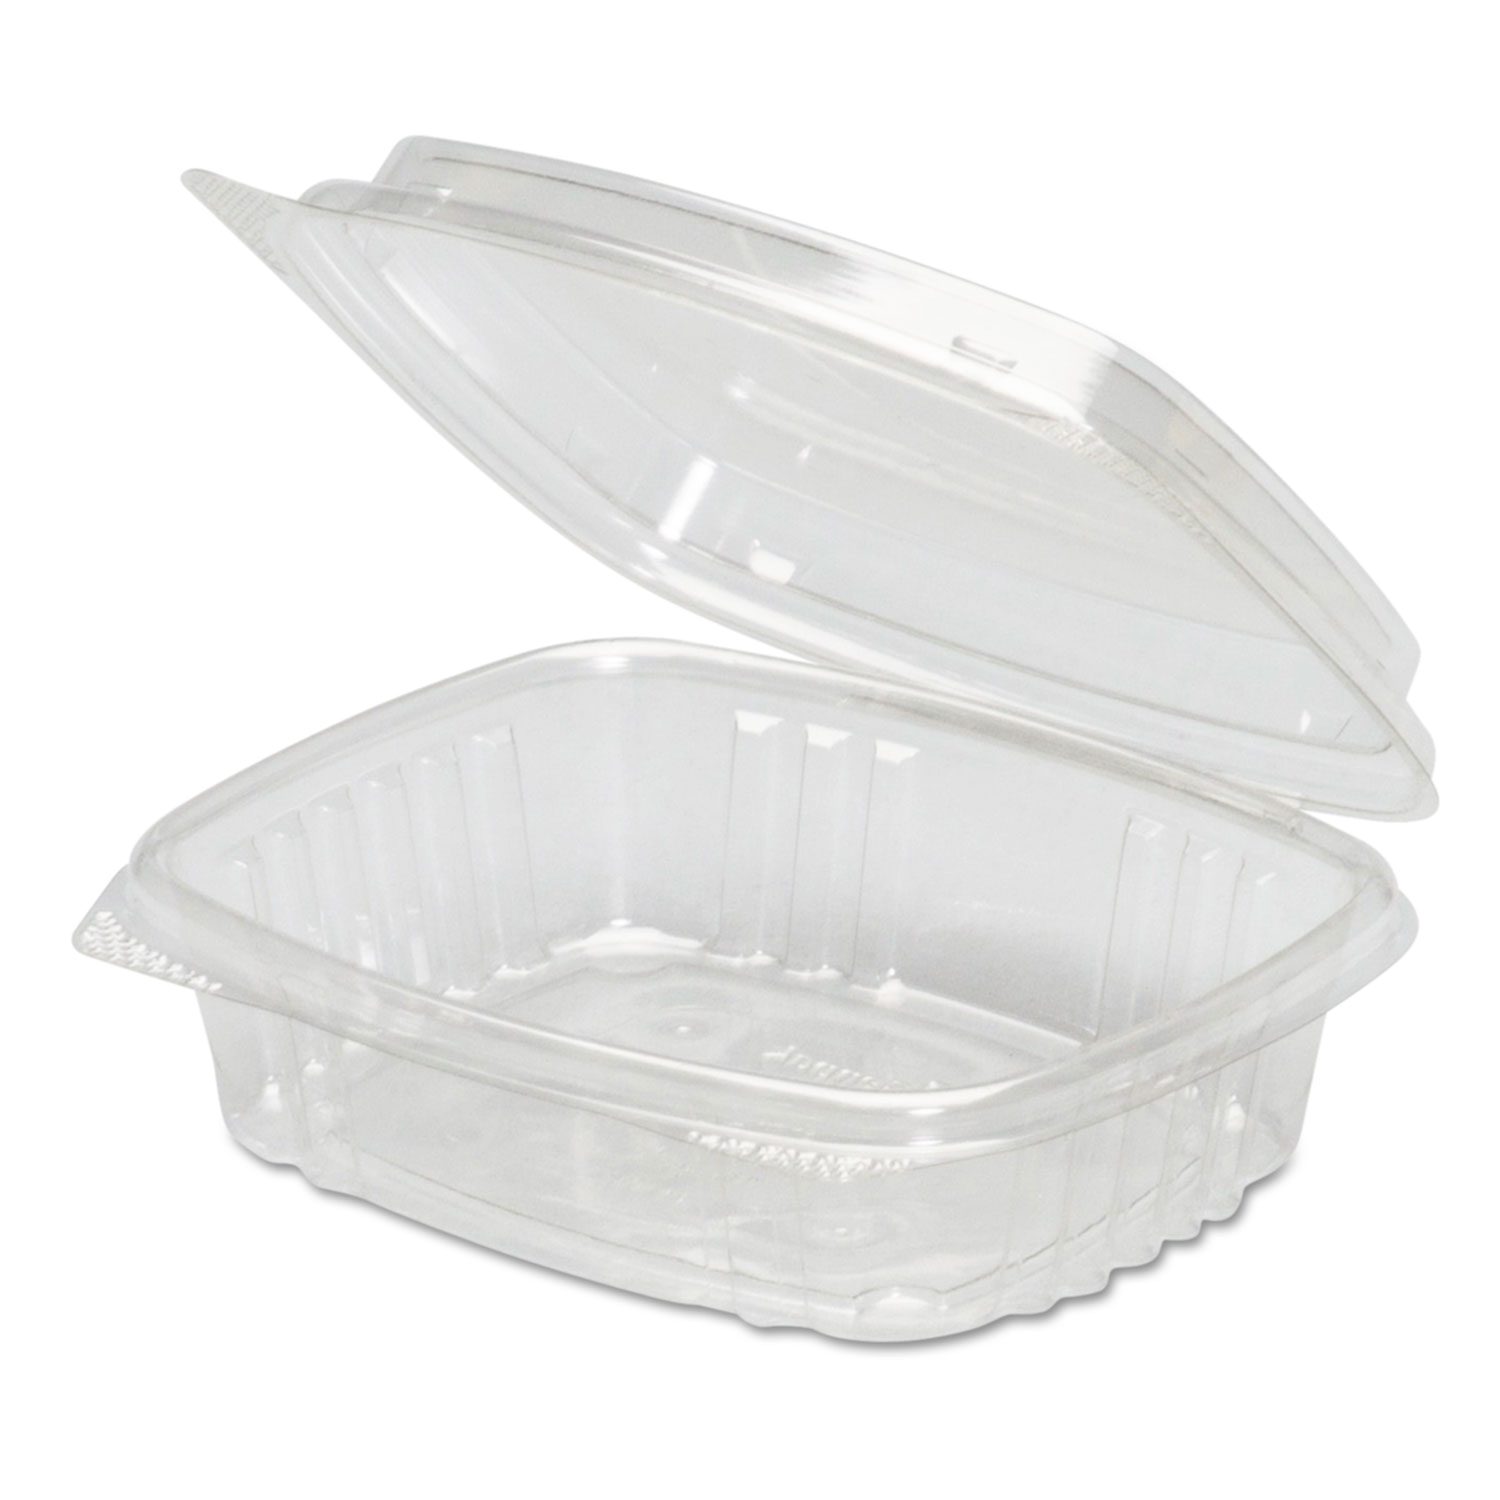  Genpak AD08F--- Clear Hinged Deli Container, High Dome Lid, APET, 8 oz,5 3/8 x 4 1/2 x 2, 200/Ct (GNPAD08F) 